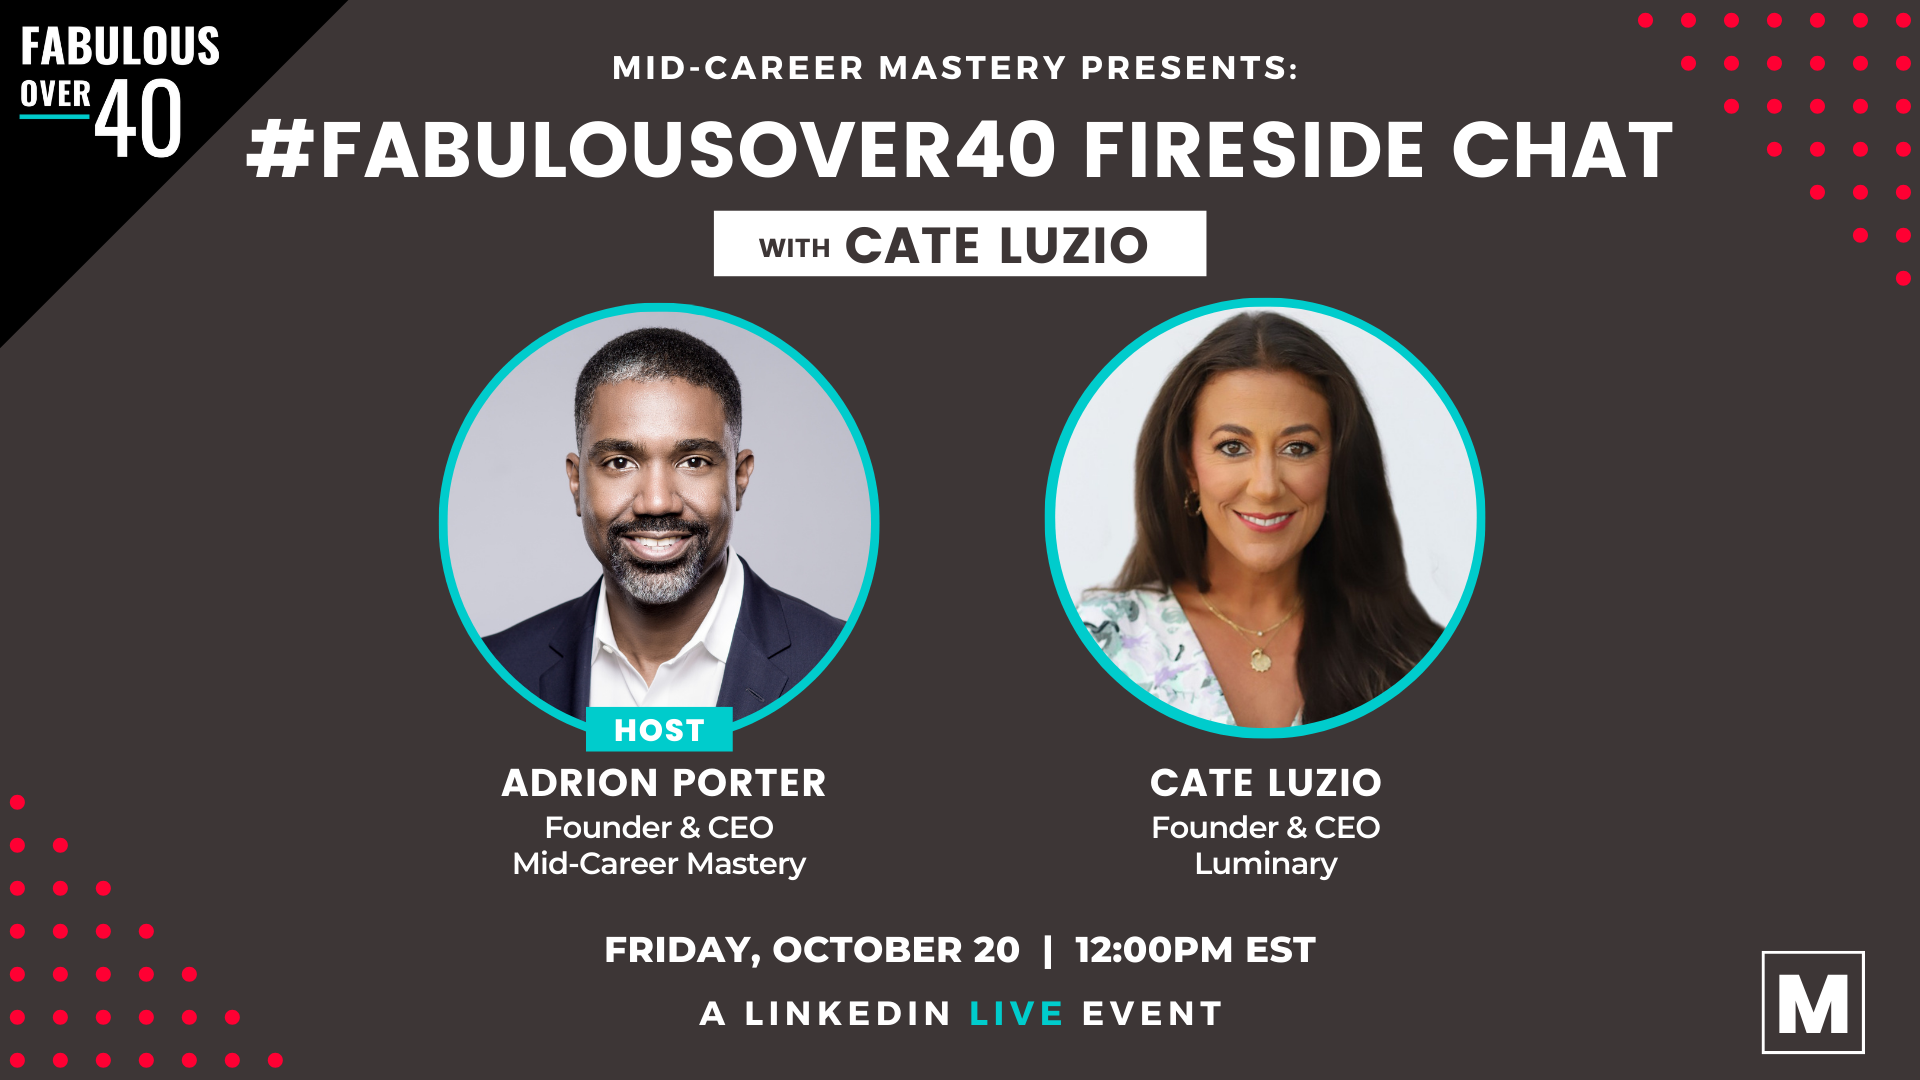 Fabulous Over 40 Fireside Chat with Cate Luzio, Founder and CEO of Luminary